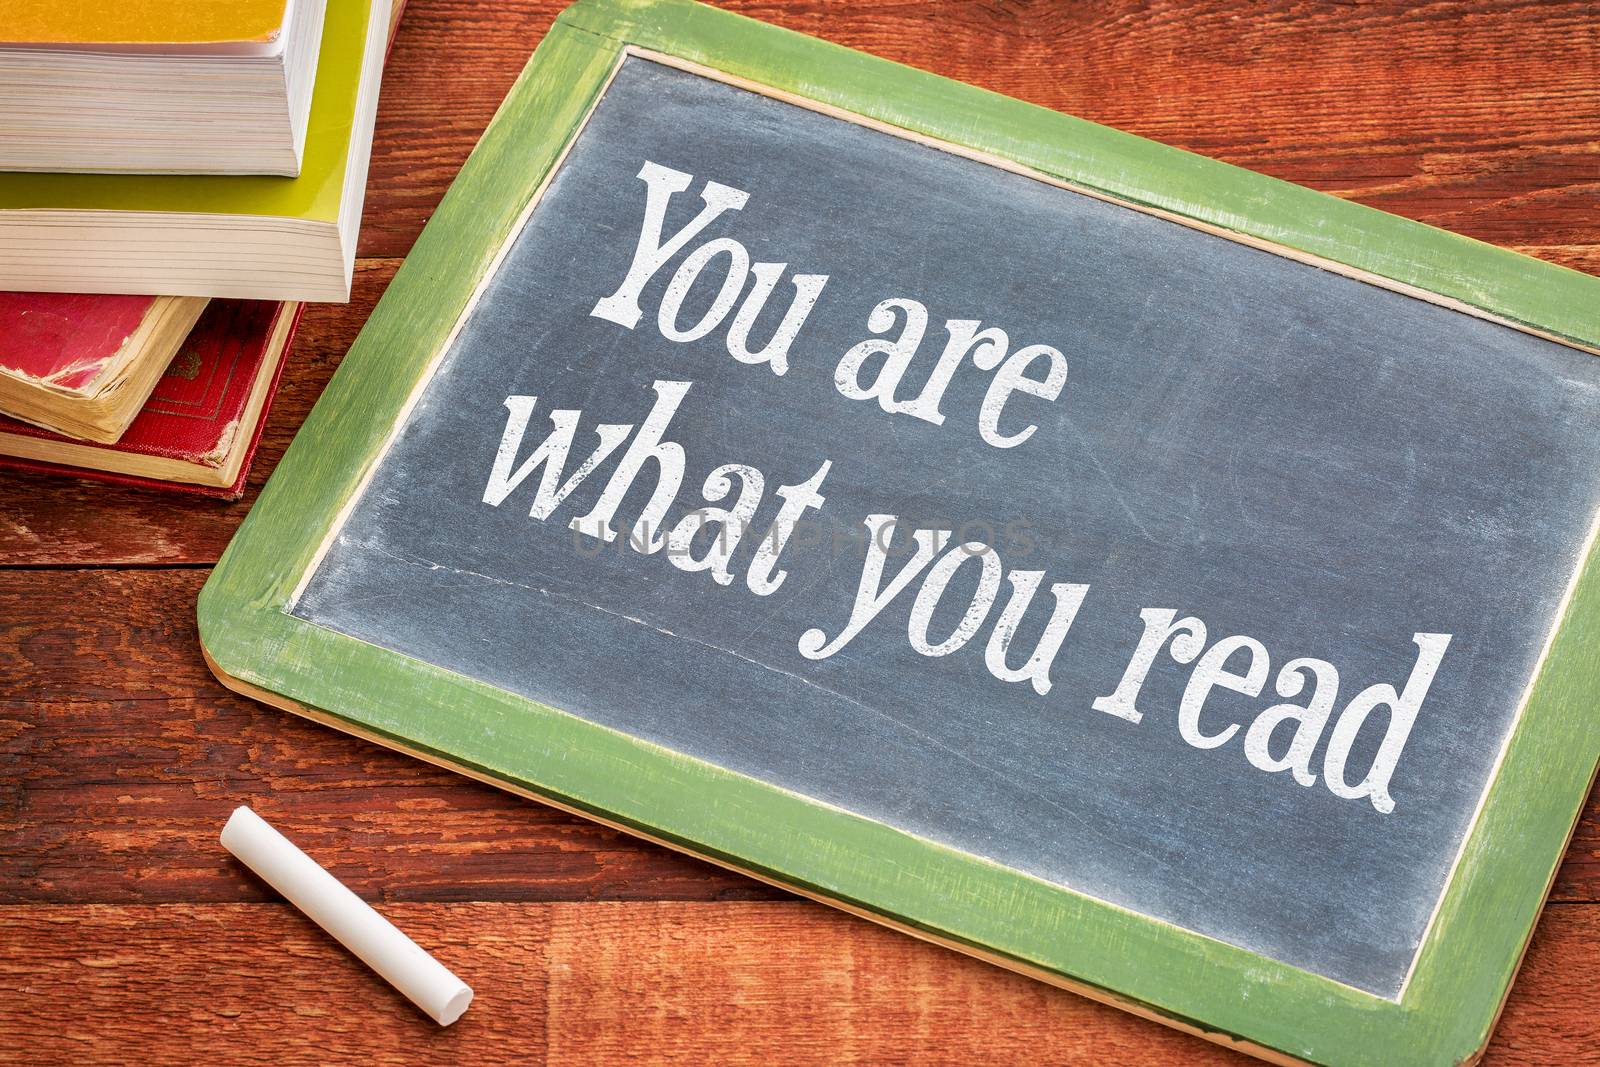 You are what you read - motivational phrase on a slate blackboard with a white chalk and a stack of books against rustic wooden table